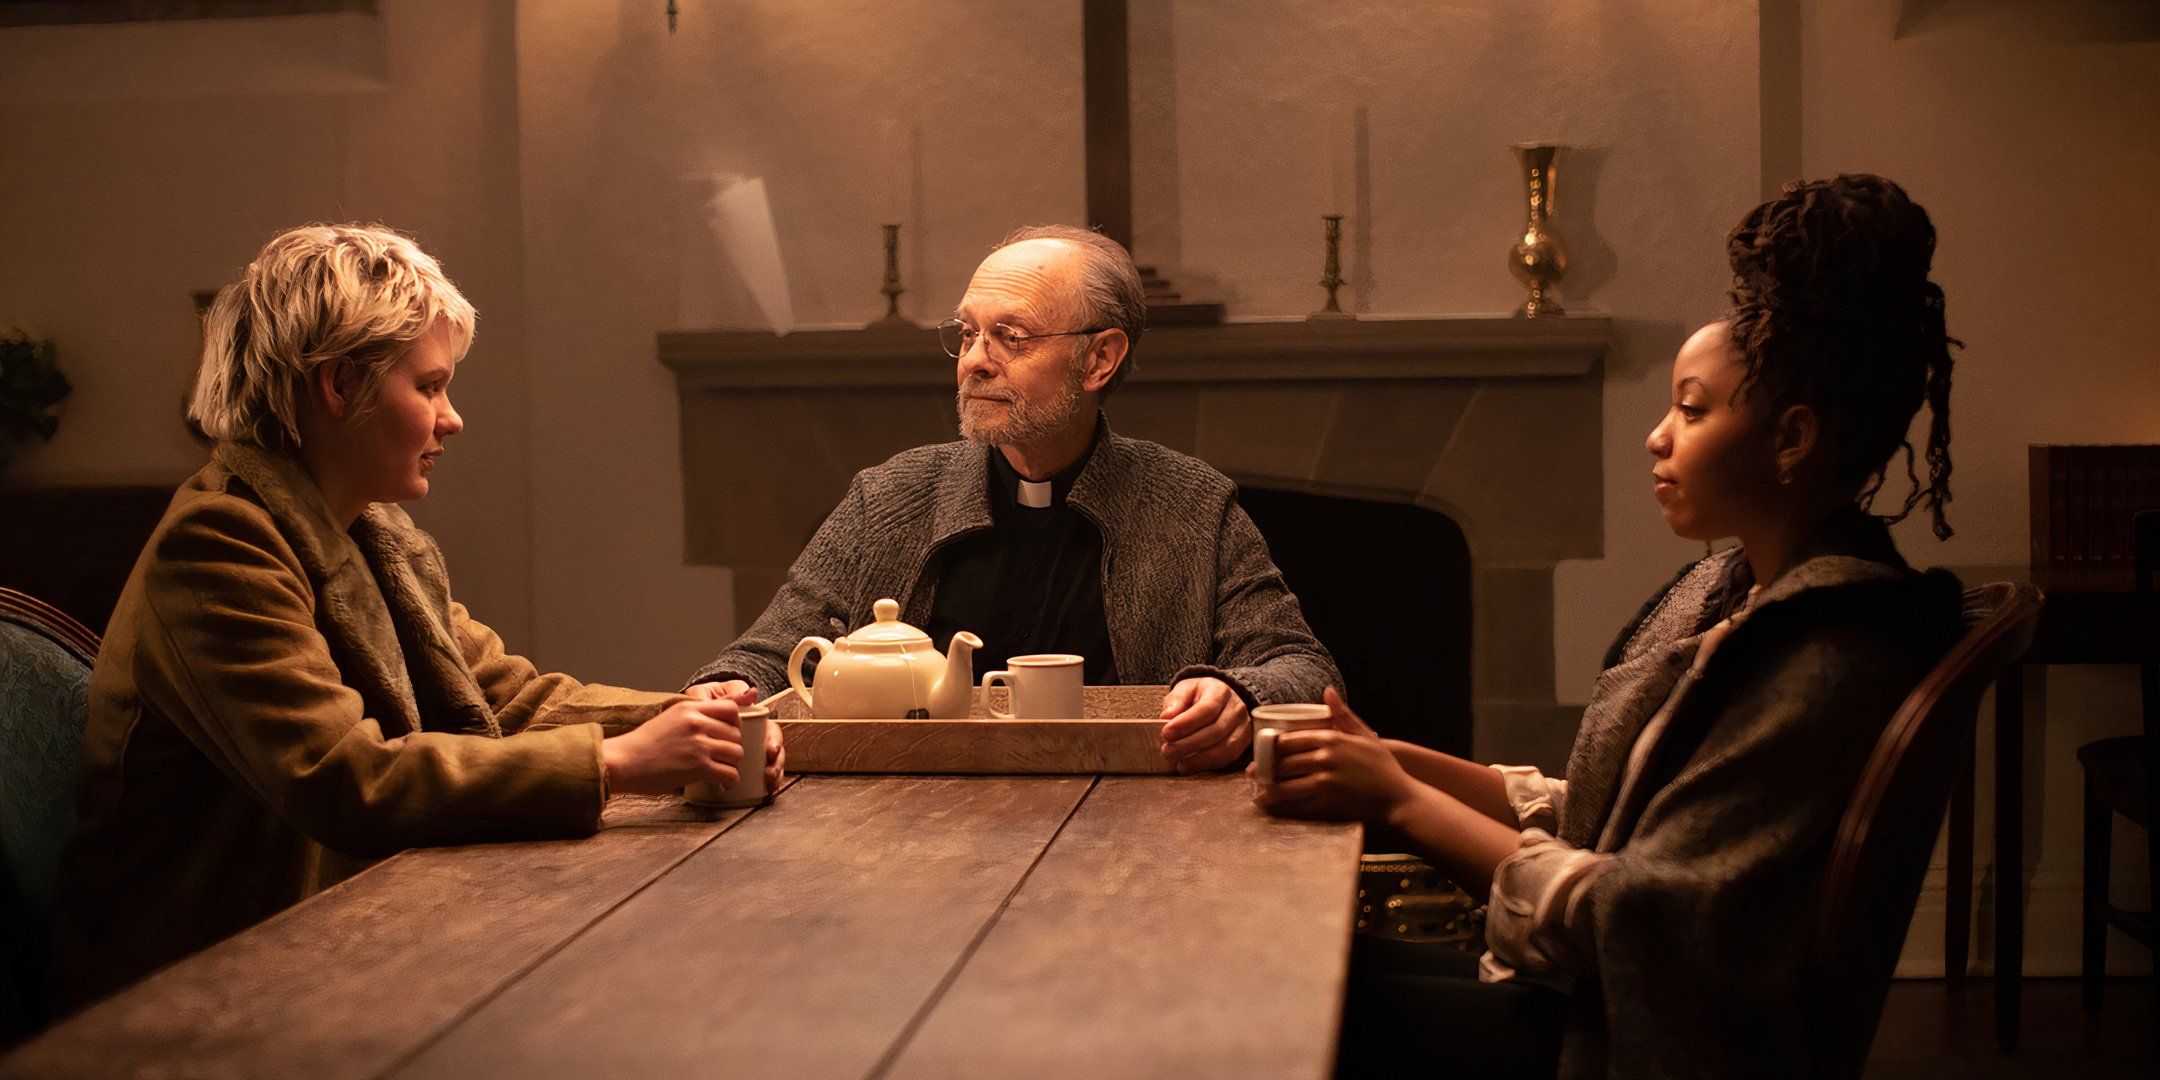 David Hyde Pierce as Father Conor having a conversation with Ryan Simpkins' Lee and Chloe Bailey's Blake in The Exorcism